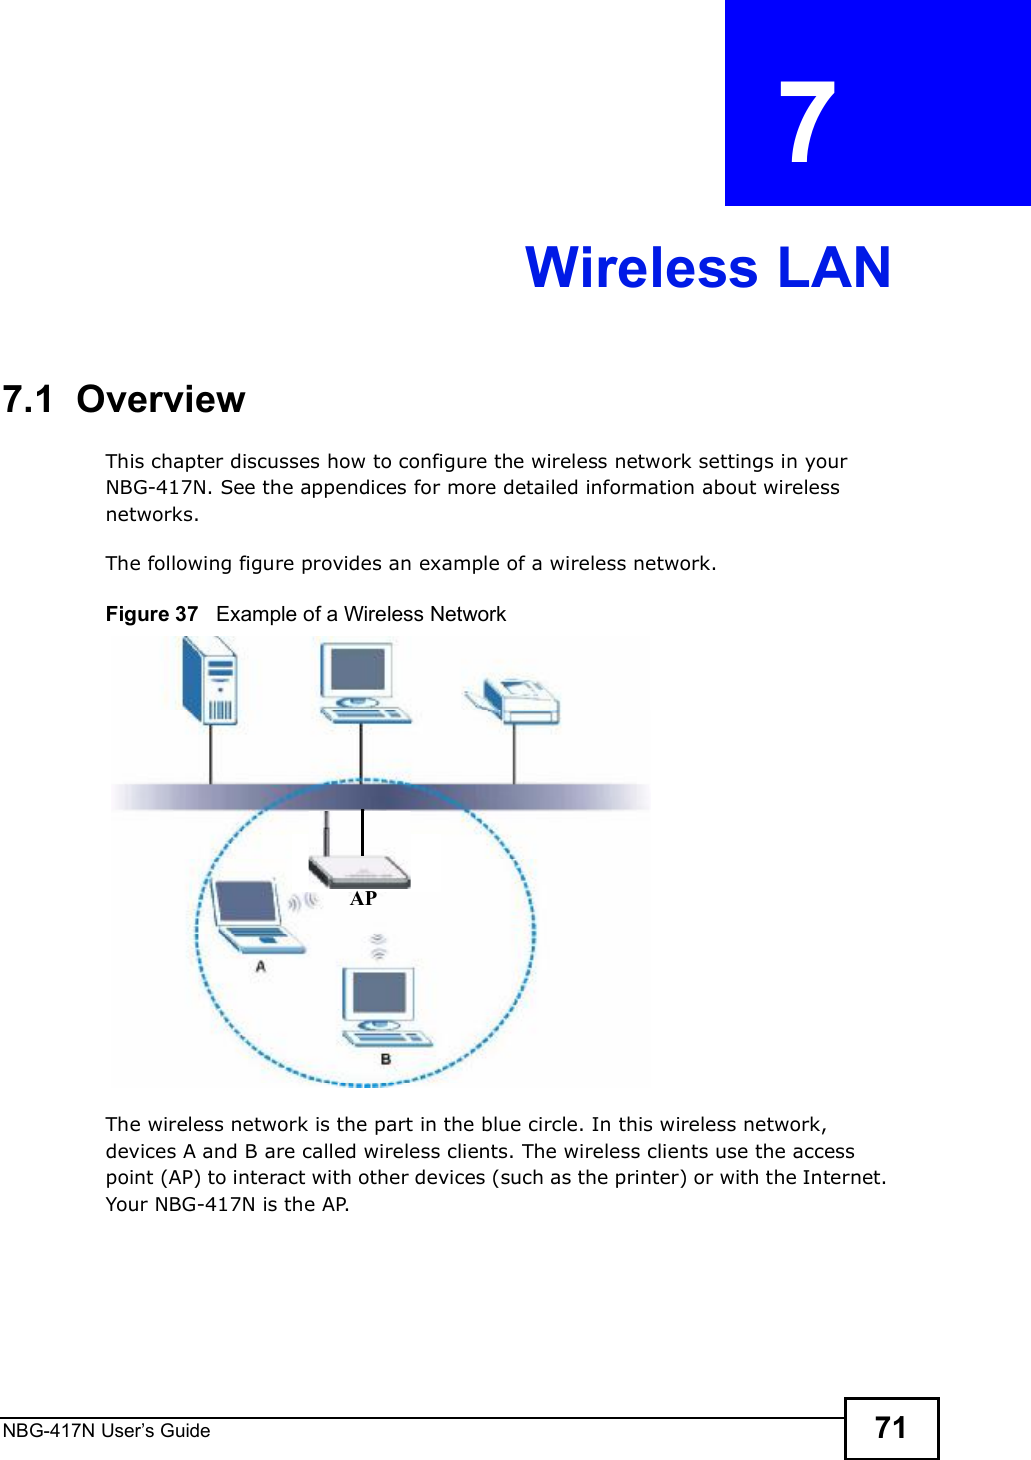 NBG-417N User s Guide 71CHAPTER  7 Wireless LAN7.1  OverviewThis chapter discusses how to configure the wireless network settings in your NBG-417N. See the appendices for more detailed information about wireless networks.The following figure provides an example of a wireless network.Figure 37   Example of a Wireless NetworkThe wireless network is the part in the blue circle. In this wireless network, devices A and B are called wireless clients. The wireless clients use the access point (AP) to interact with other devices (such as the printer) or with the Internet. Your NBG-417N is the AP.AP